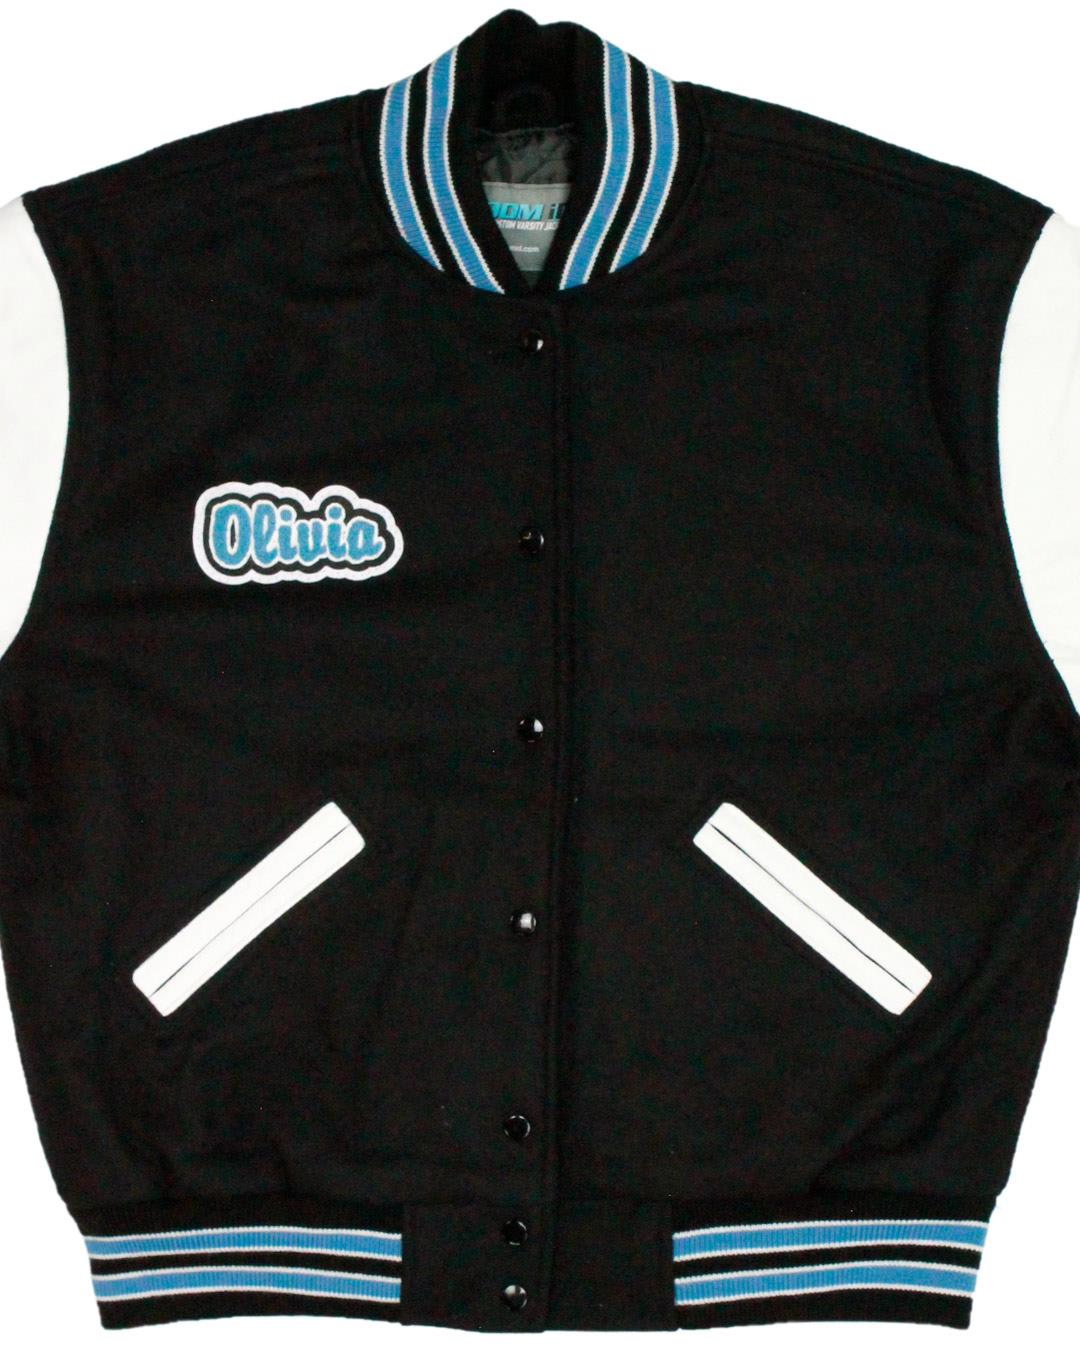 Hilliard Darby High School Panthers Letterman Jacket, Hilliard, OH - Front